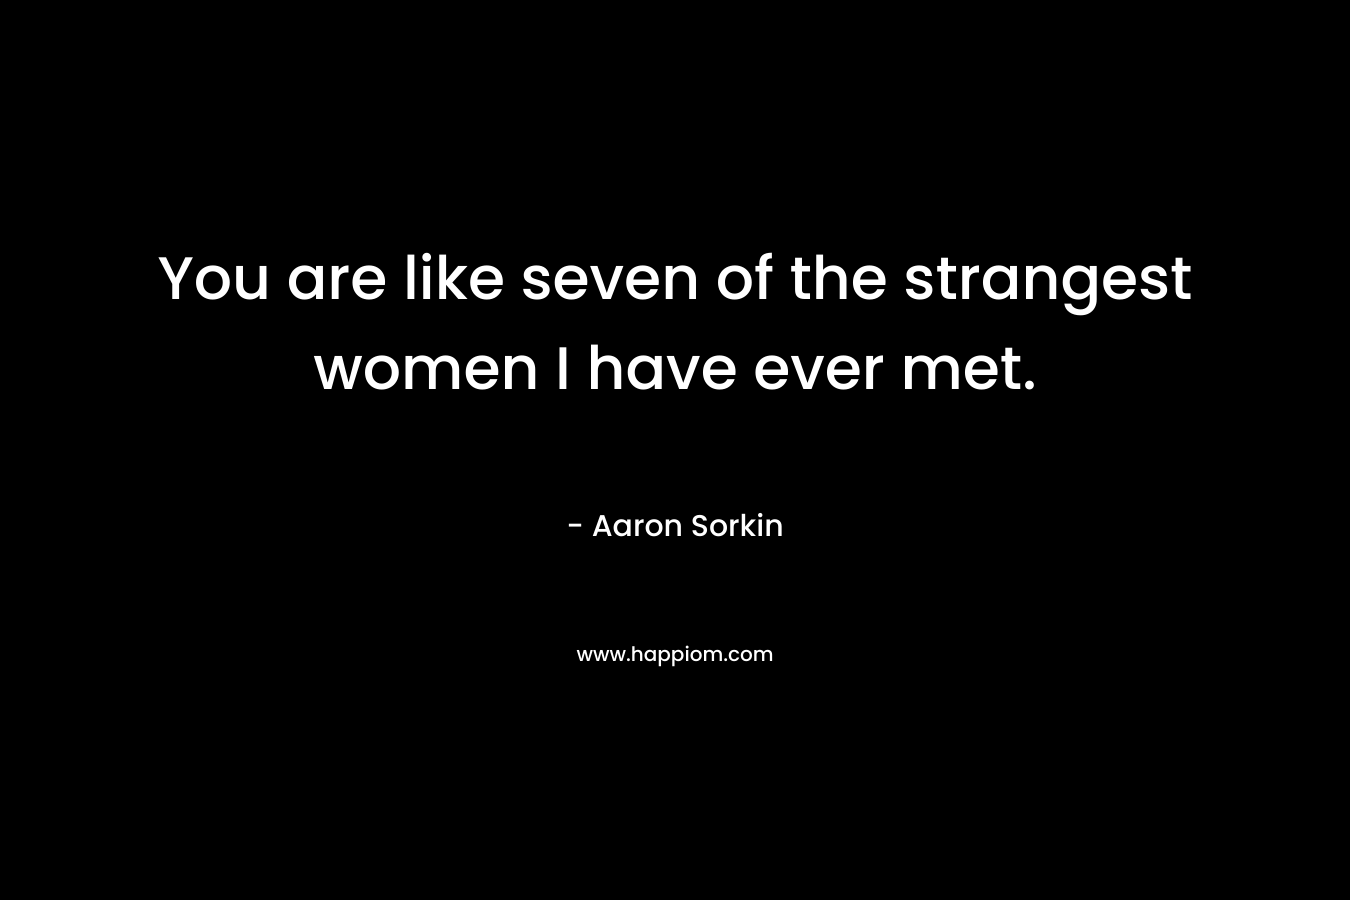 You are like seven of the strangest women I have ever met.